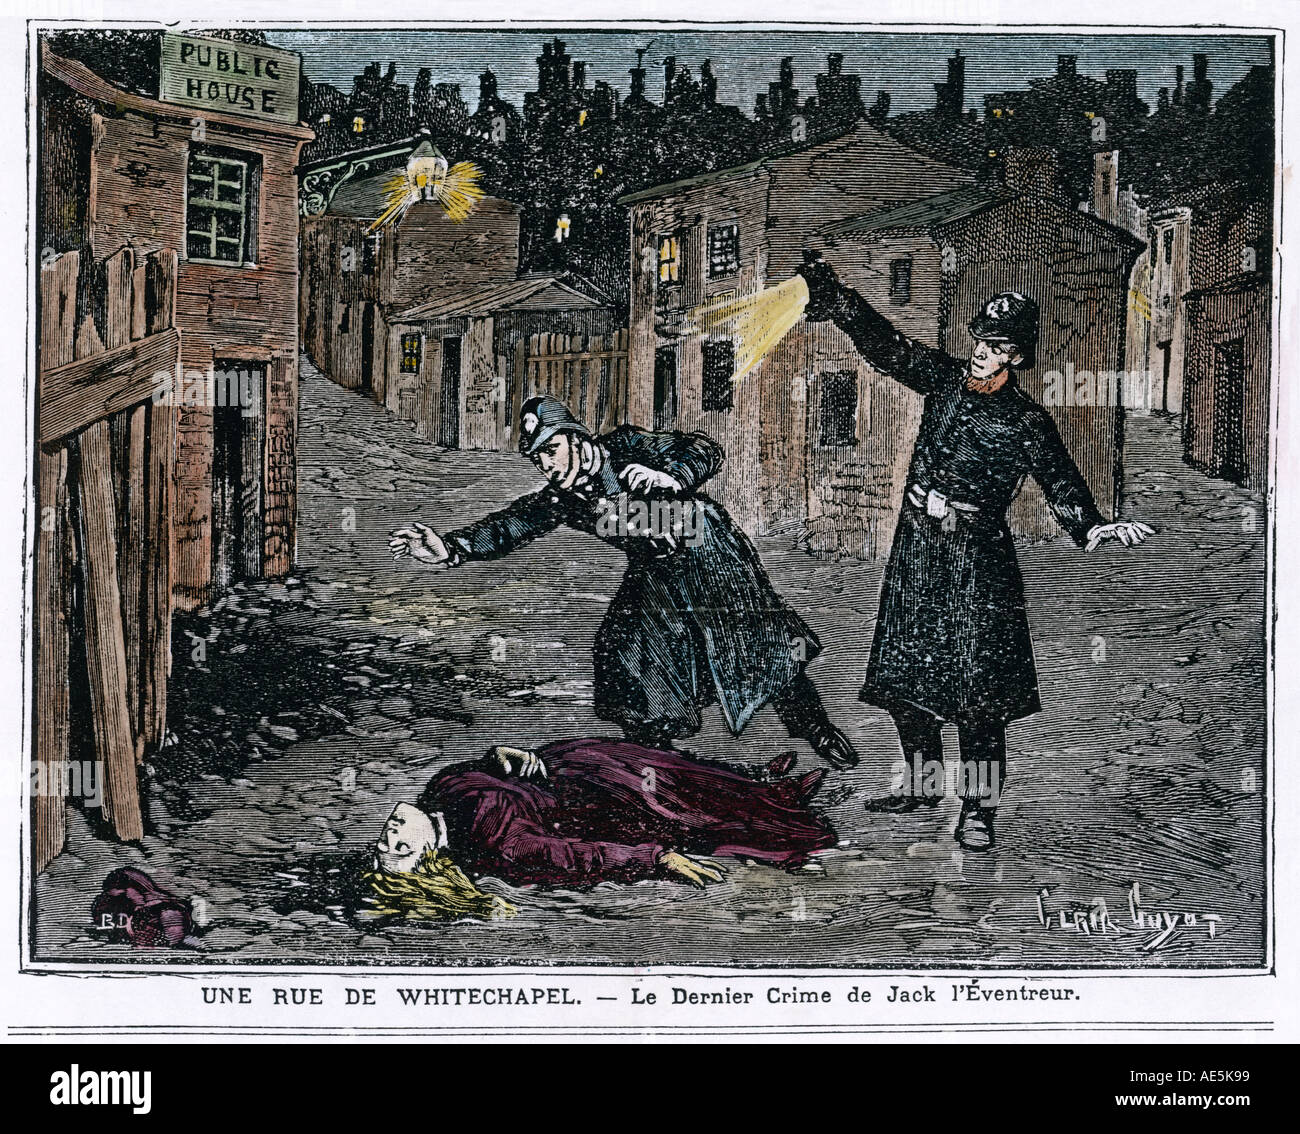 1888 WHITECHAPEL THE CRIMES OF JACK THE RIPPER METAL SIGN  VINTAGE STYLE SMALL 